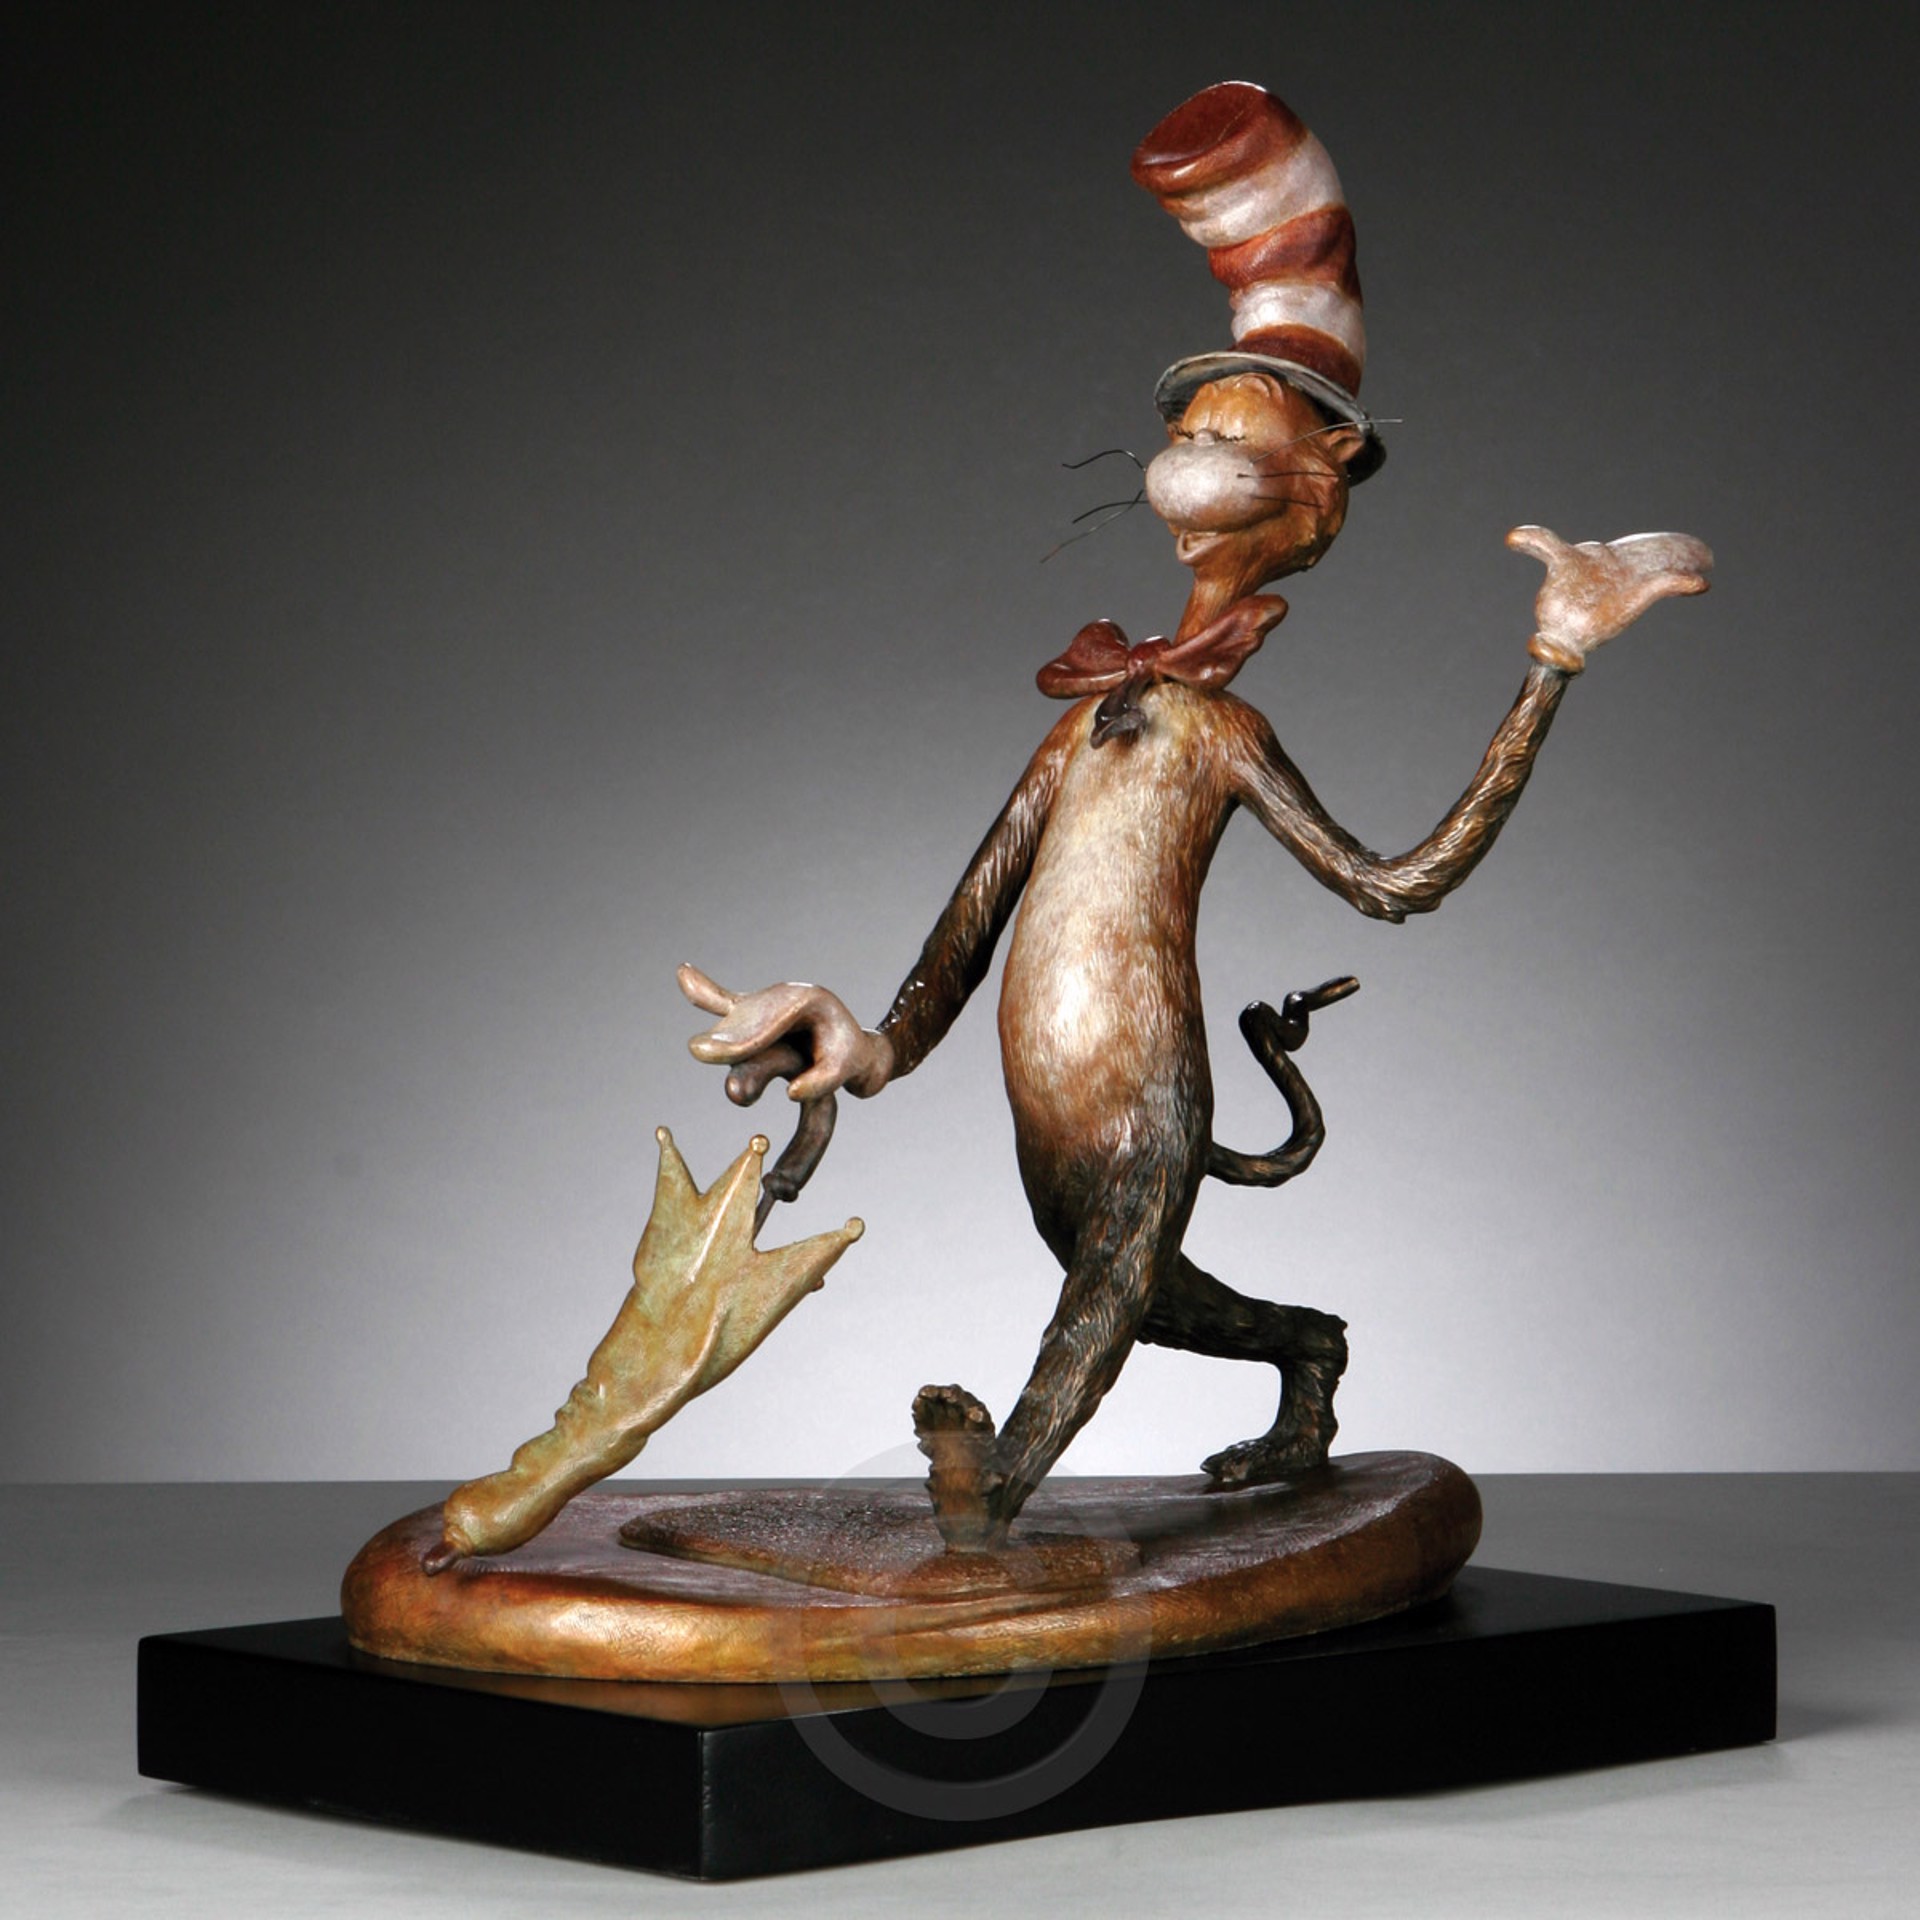 The Cat In The Hat (Maquette) by Dr. Seuss